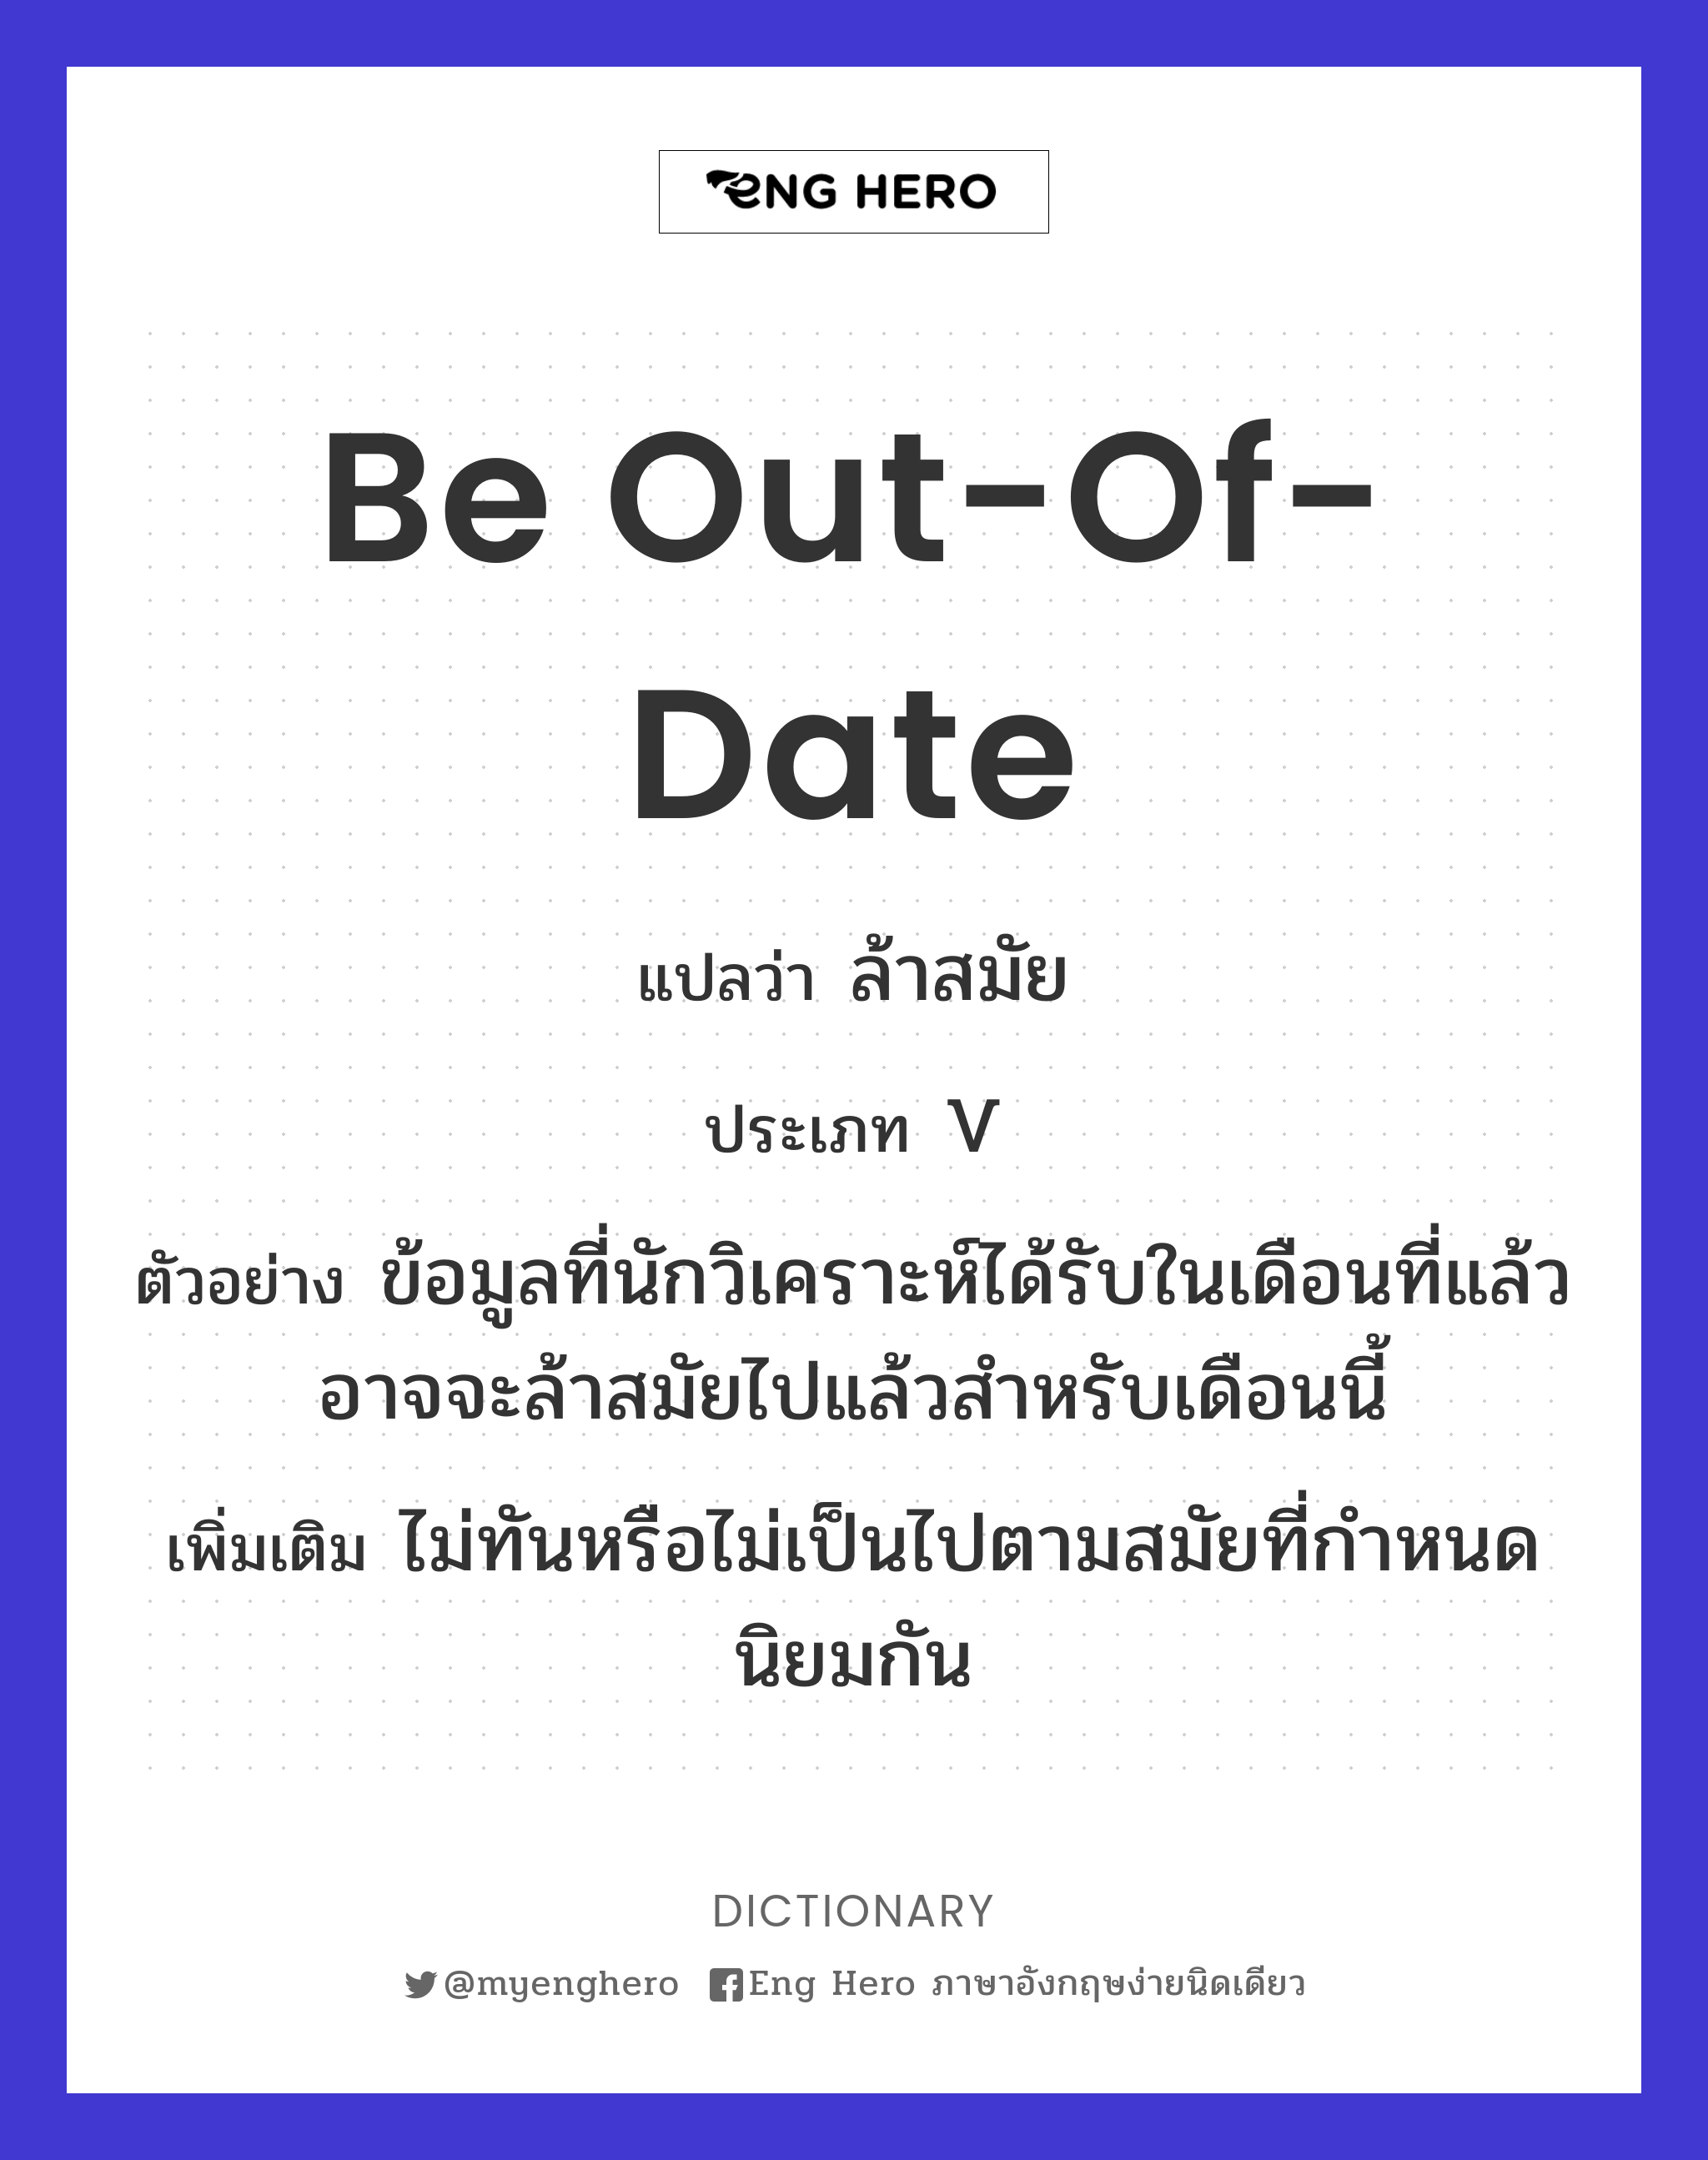 be out-of-date